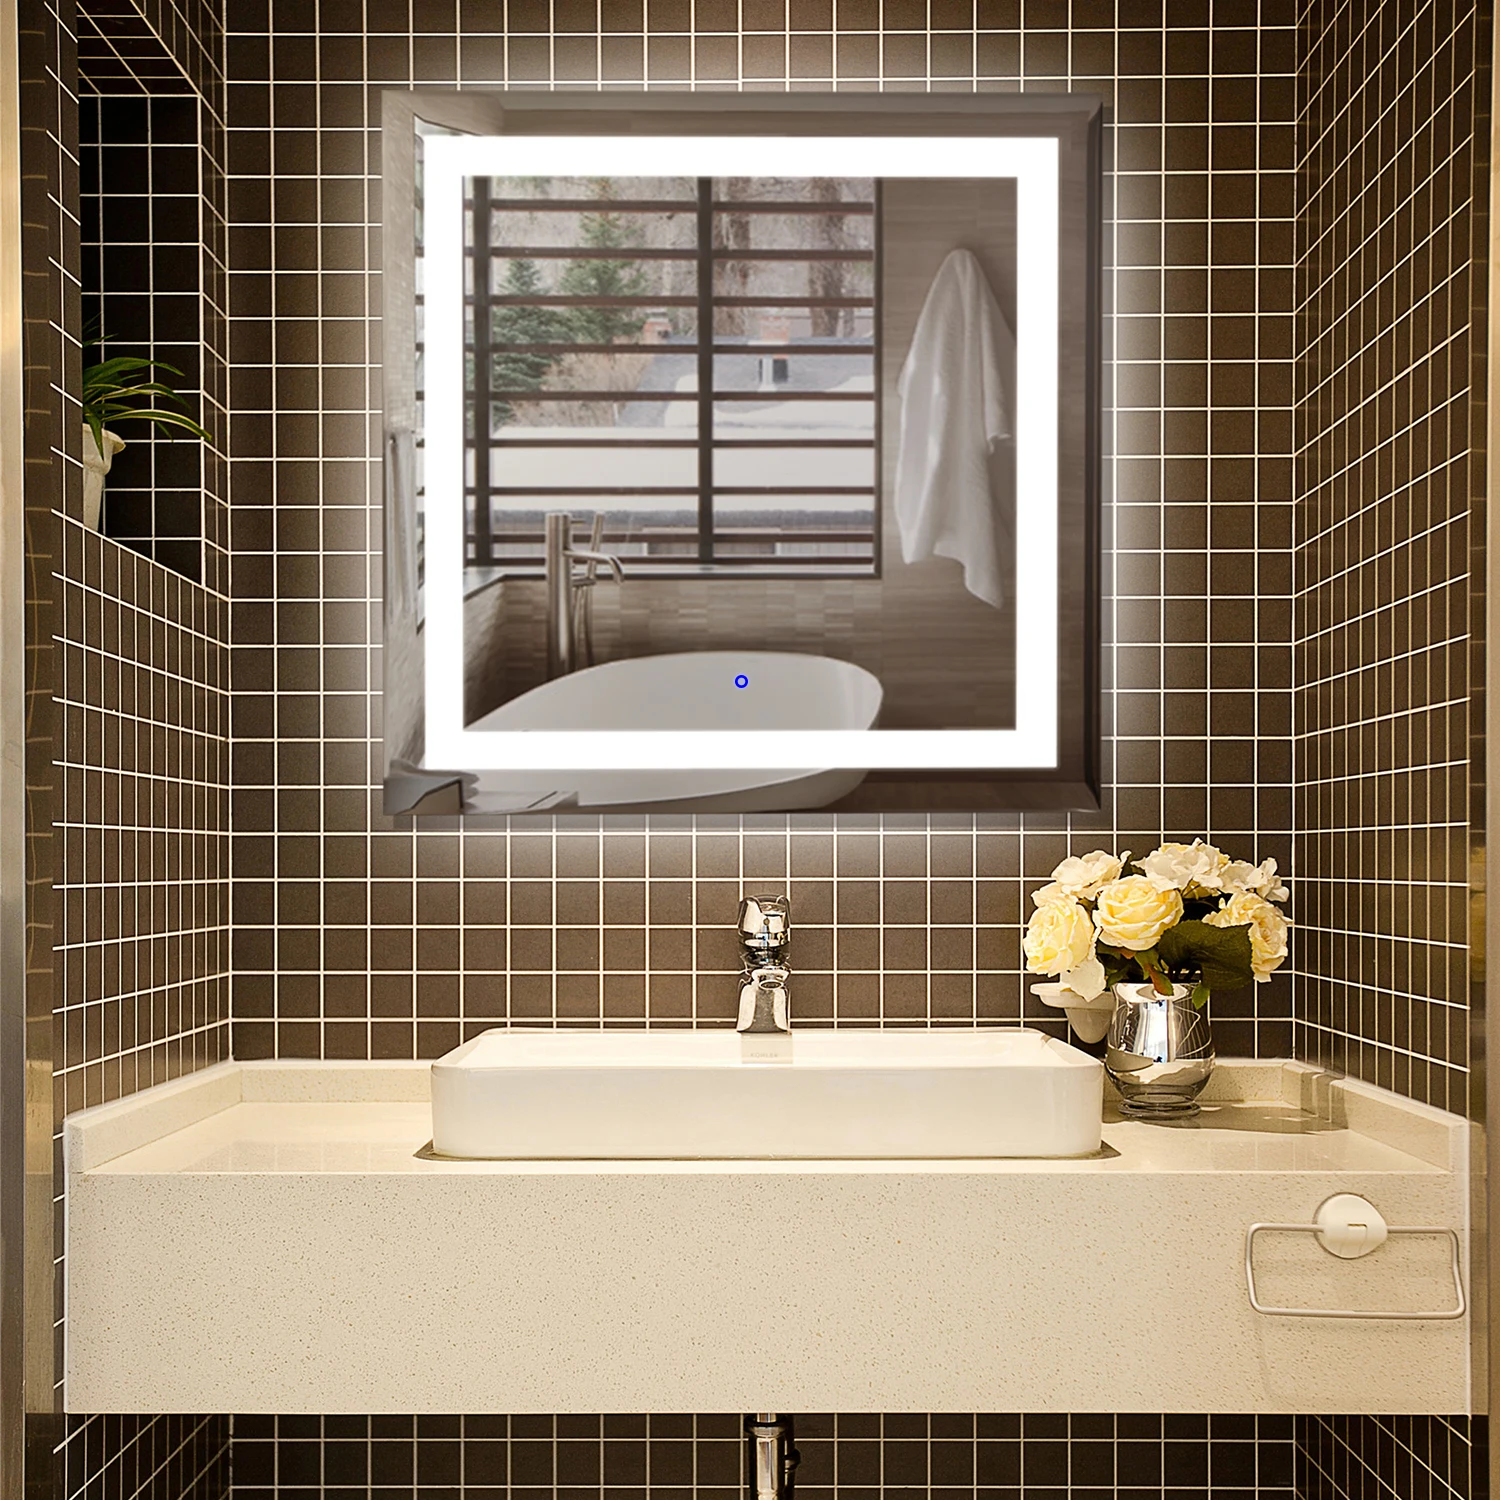 Wall Mounted Led Backlit Bathroom Lighted Vanity Wall Mirror With Lights Behind Buy Backlit Led Mirror Led Vanity Wall Mirrors Backlit Vanity Mirror Product On Alibaba Com